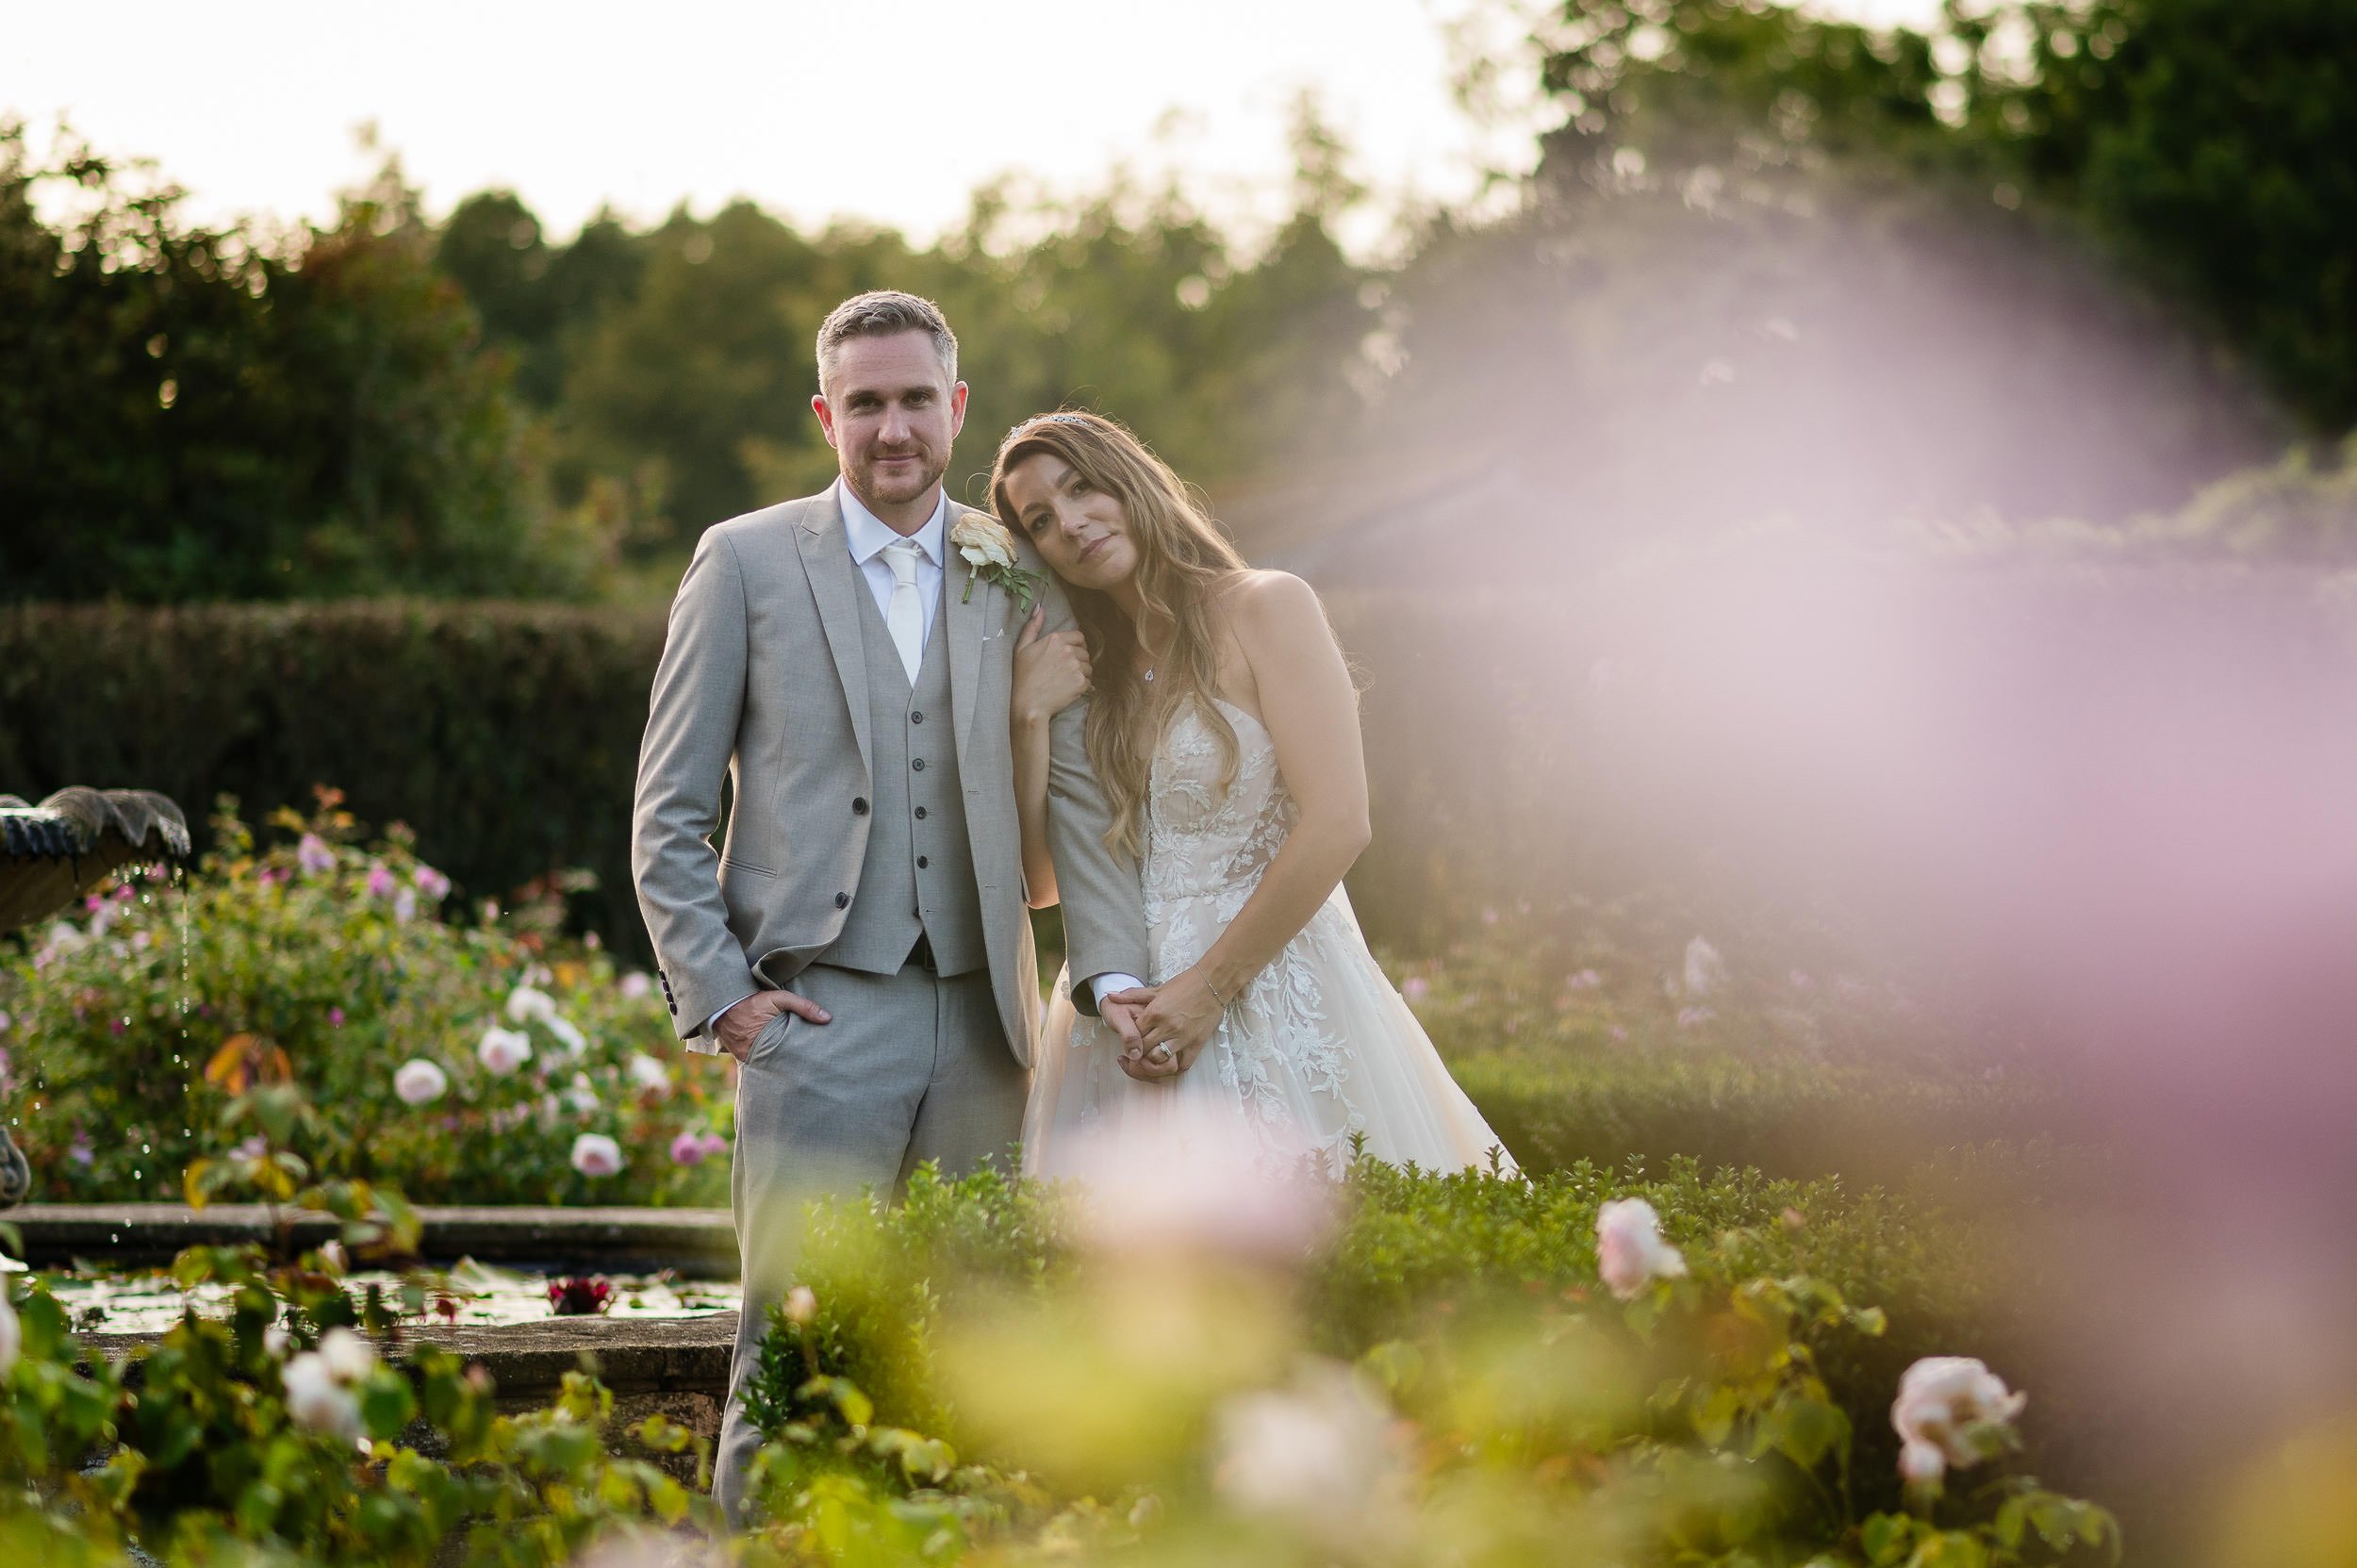 Bride and Groom in the walled garden at Hethfelton House wedding